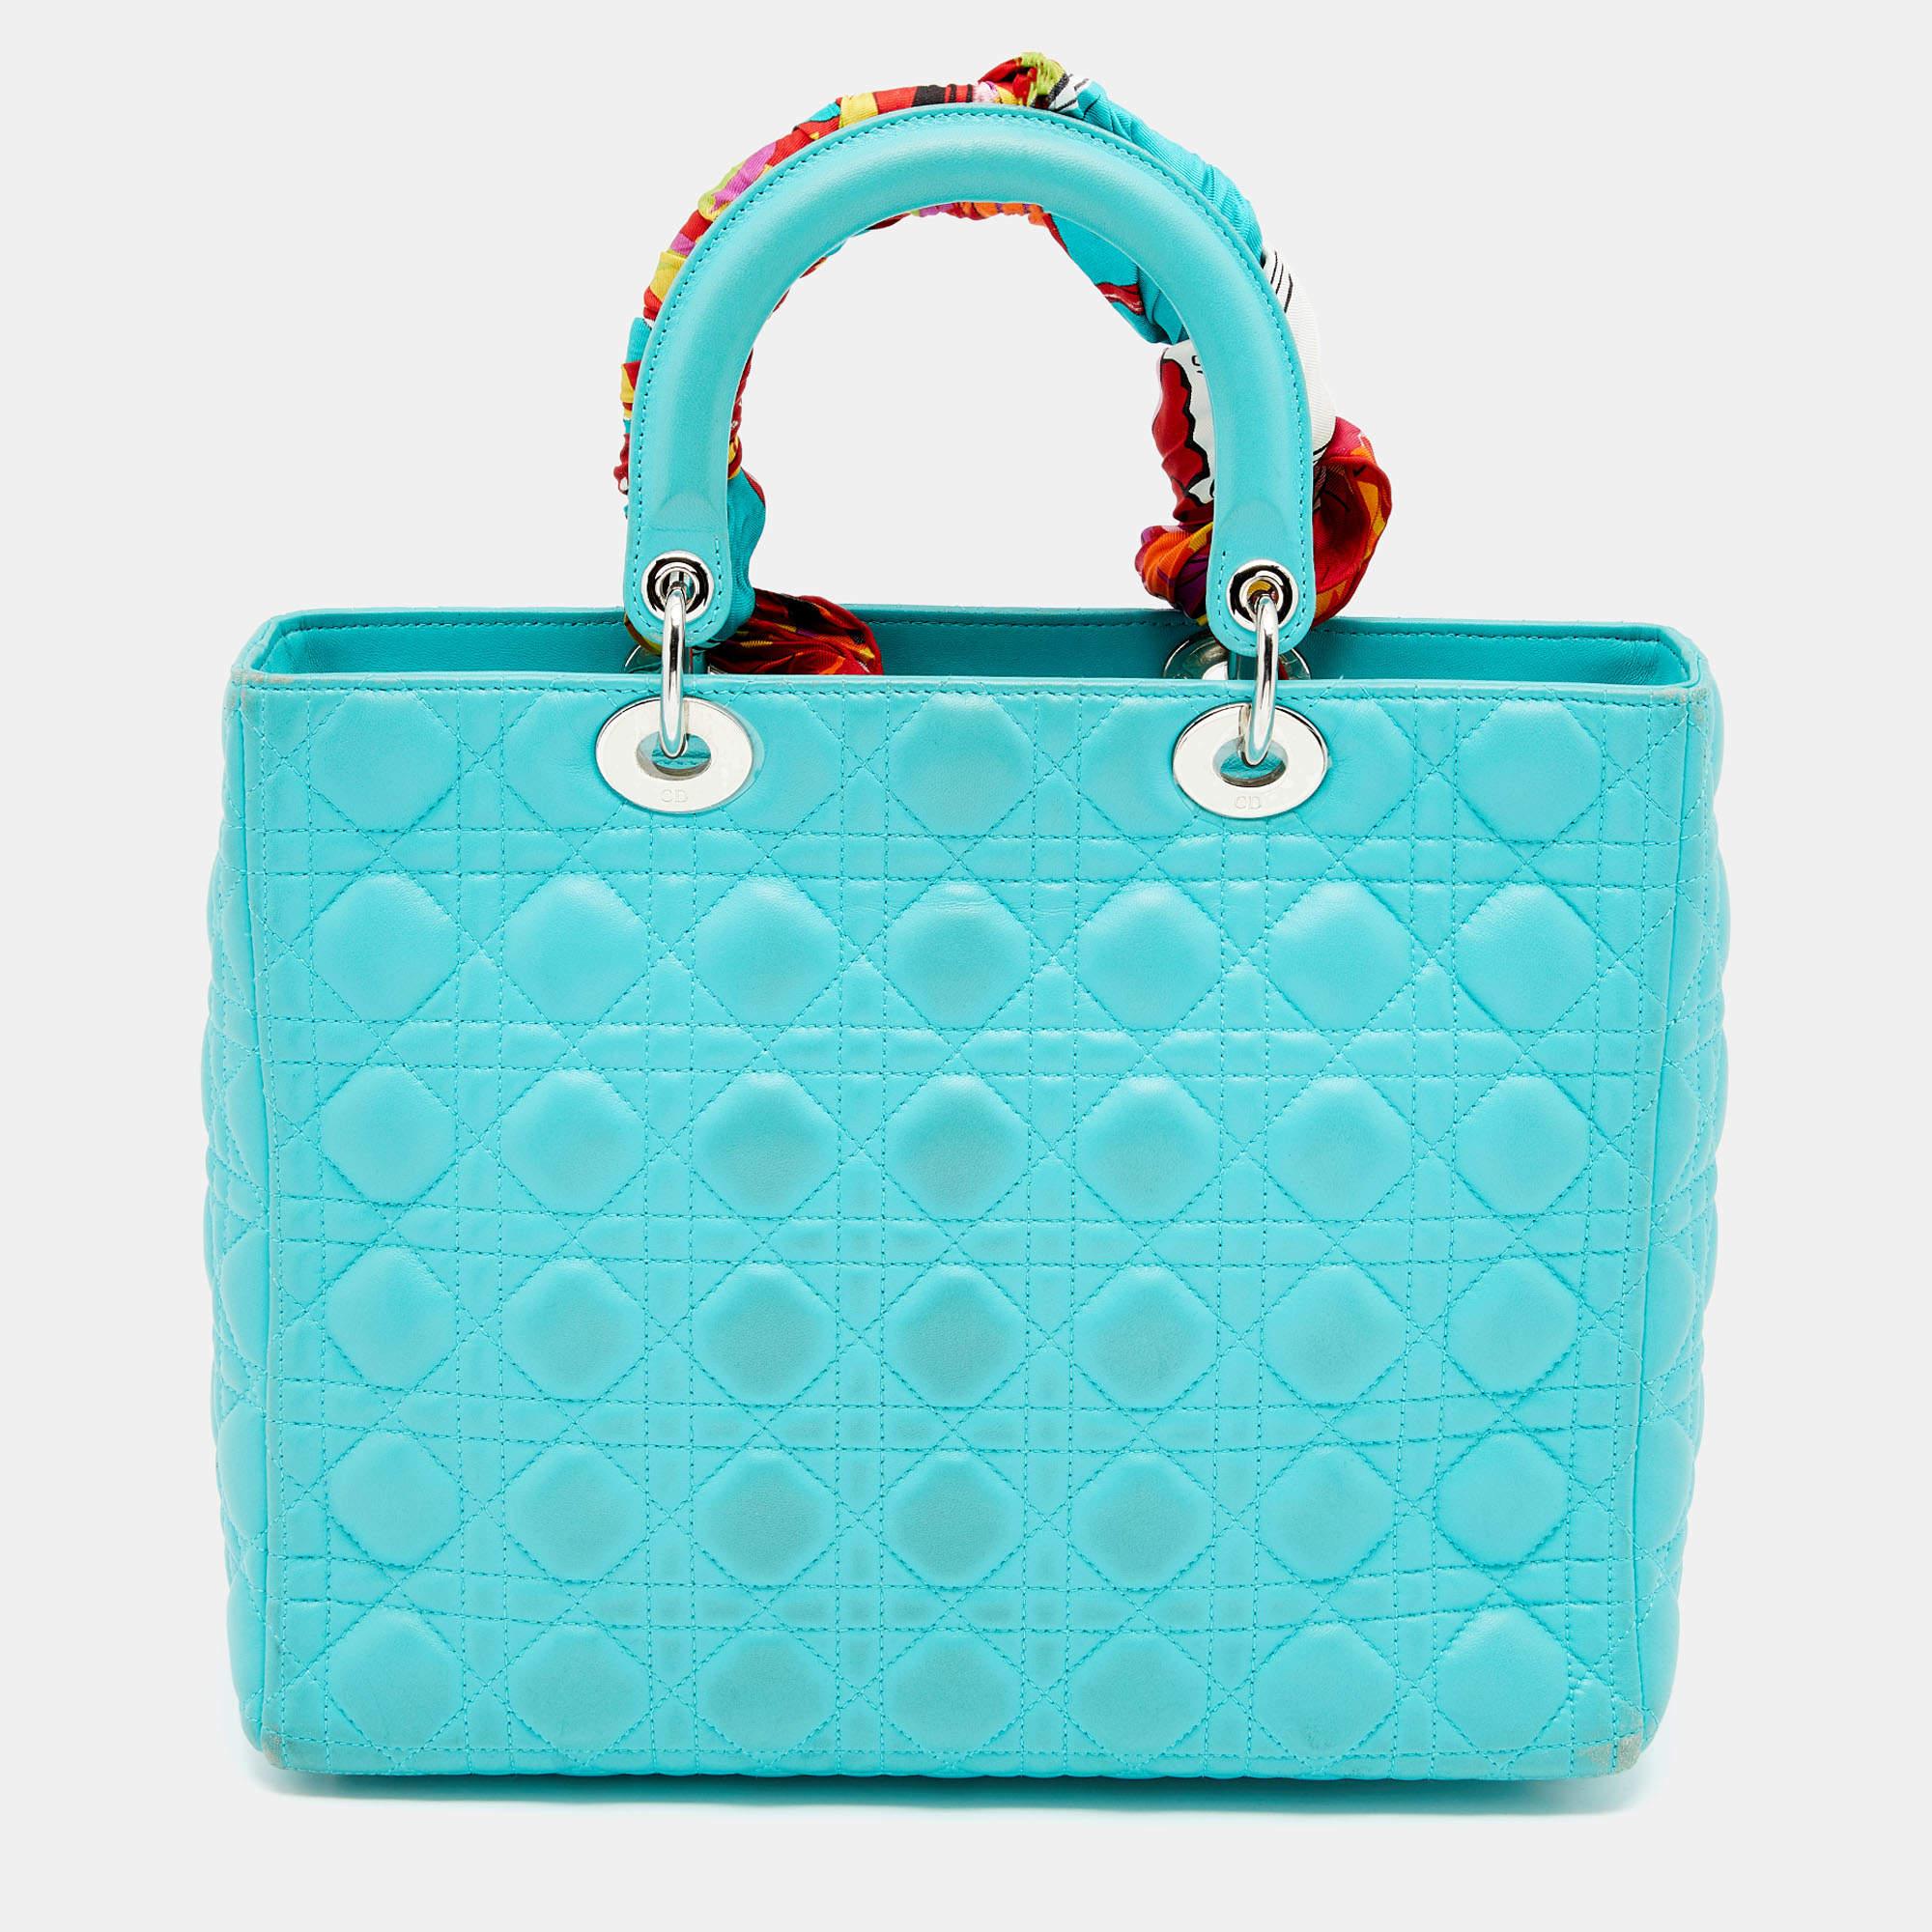 A timeless status and great design mark the Lady Dior tote. It is an iconic bag that people continue to invest in to this day. We have here this large Lady Dior tote crafted from turquoise blue Cannage leather. The bag is complete with two top